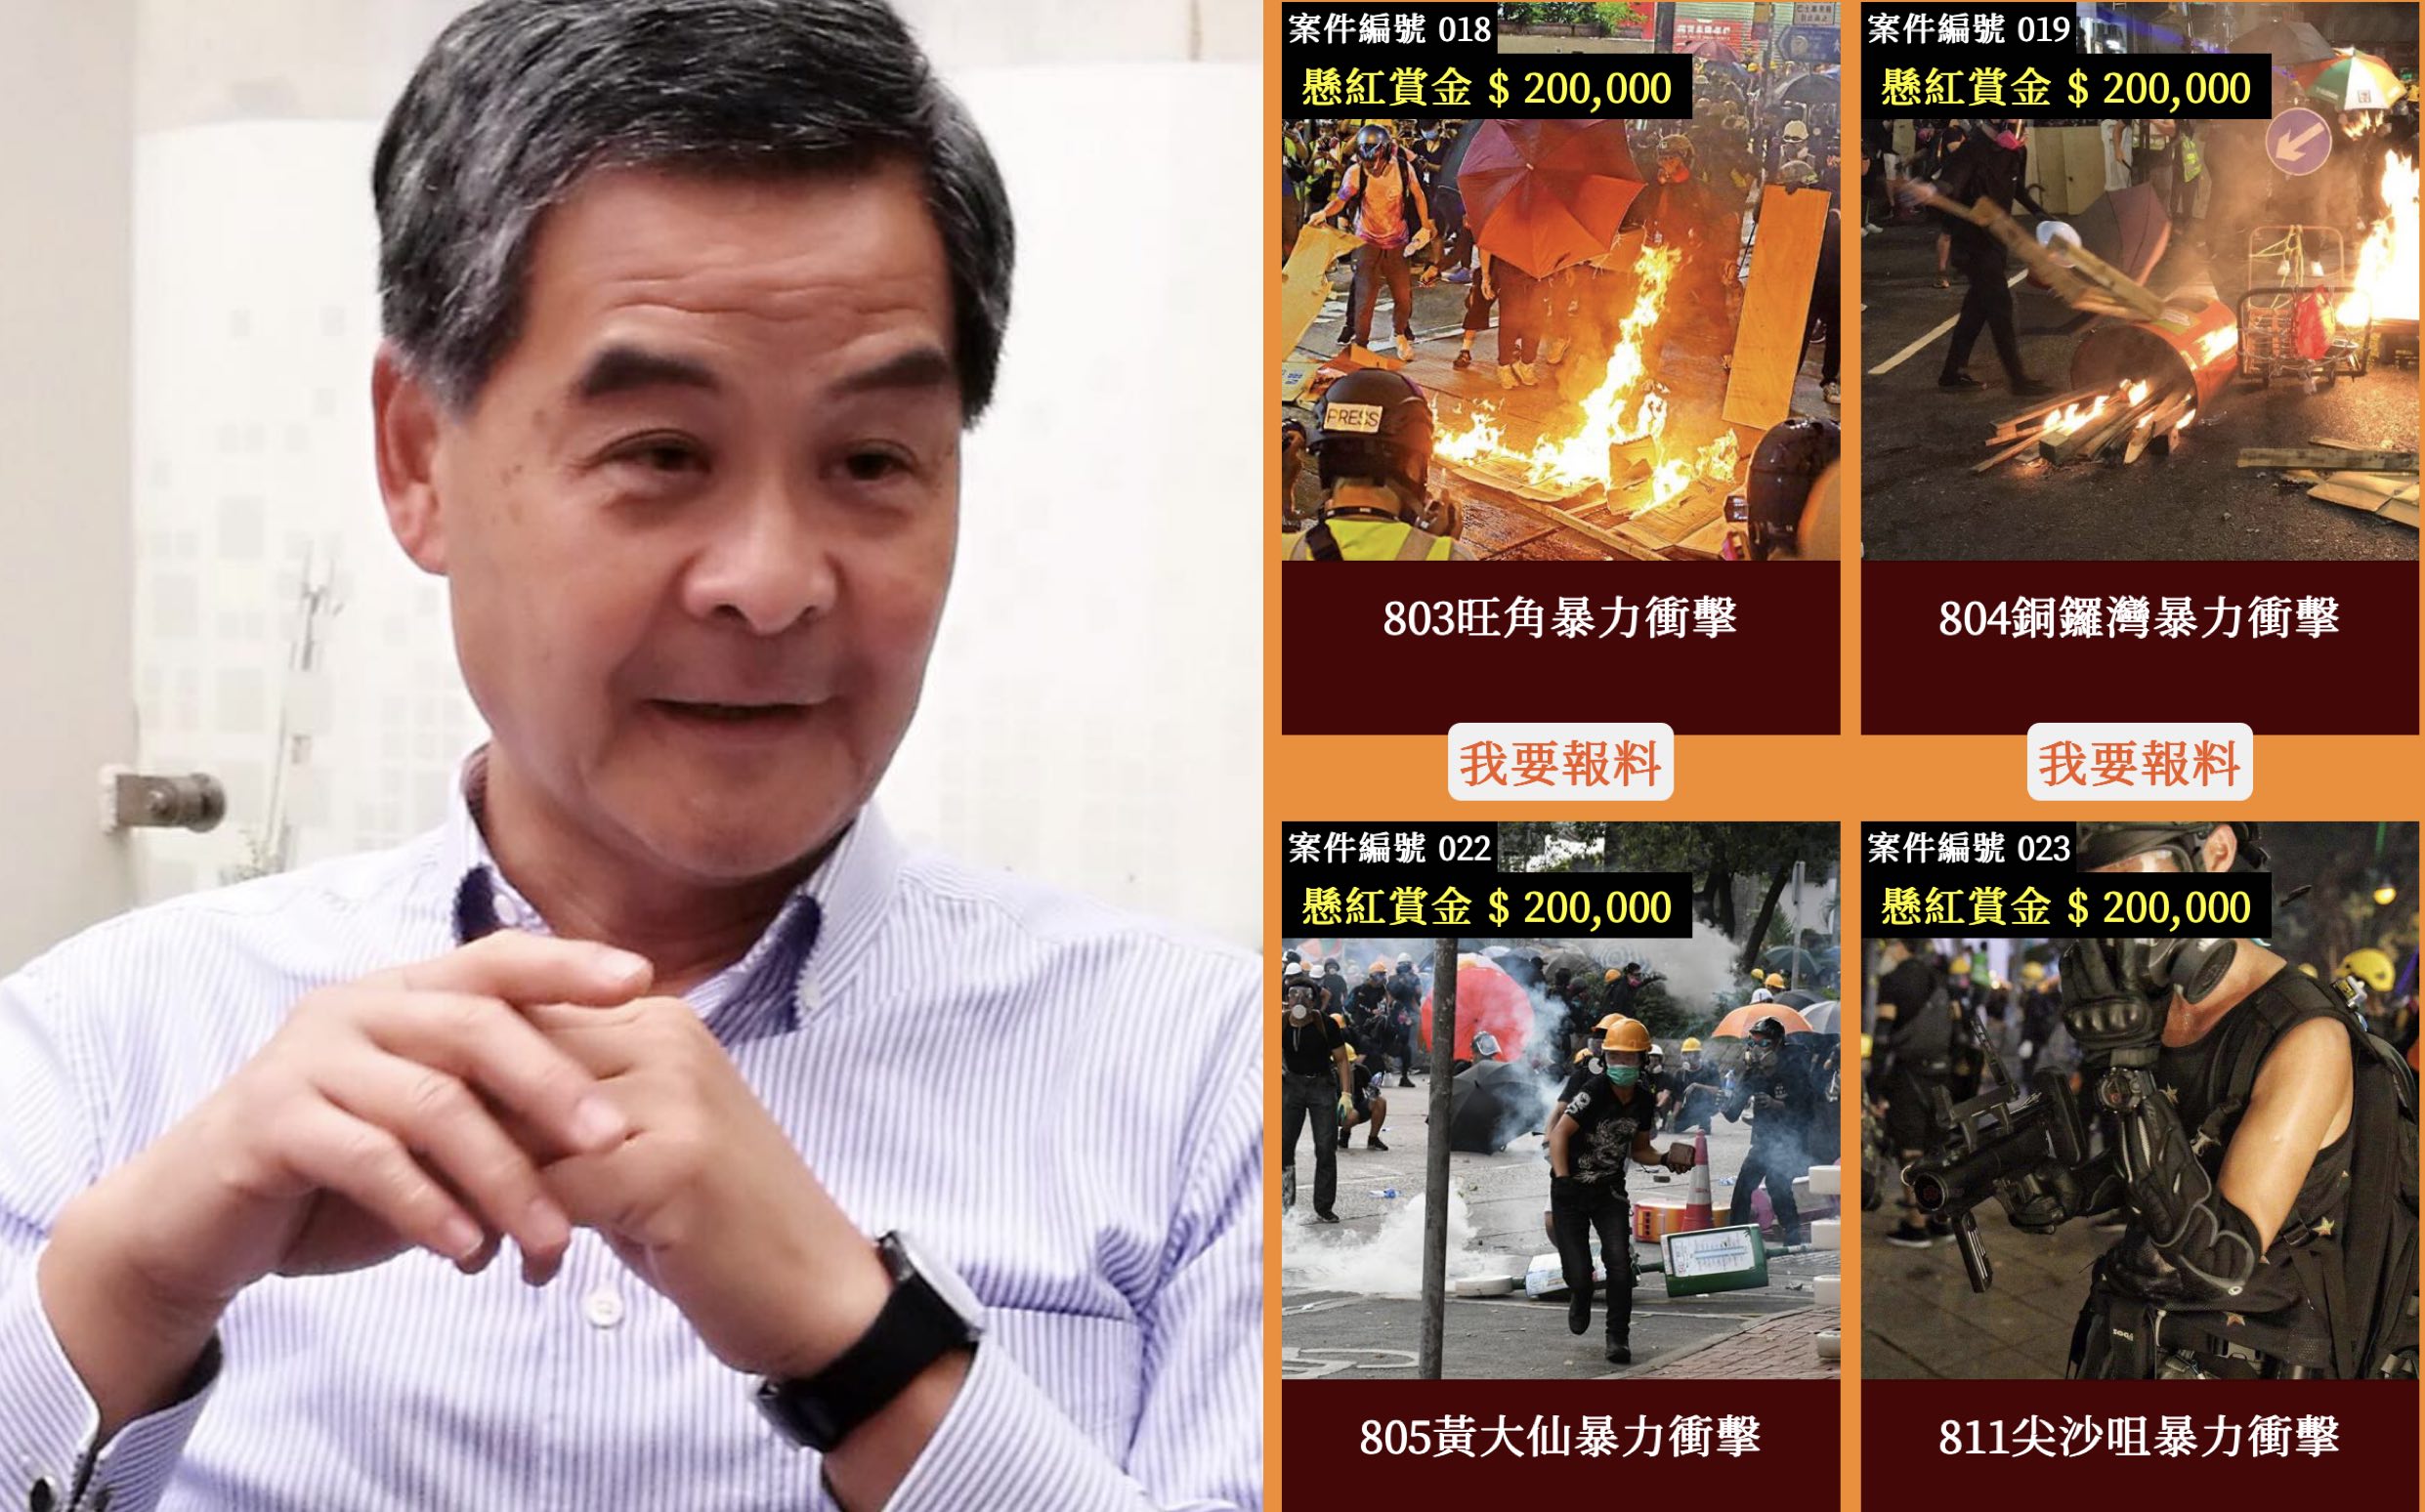 Former chief executive CY Leung has launched a website with a tip line offering rewards to those who identify frontline protesters seen defacing the Chinese insignia, breaking into the Legislative Council and starting fires during protests. Photos via Facebook/CY Leung.